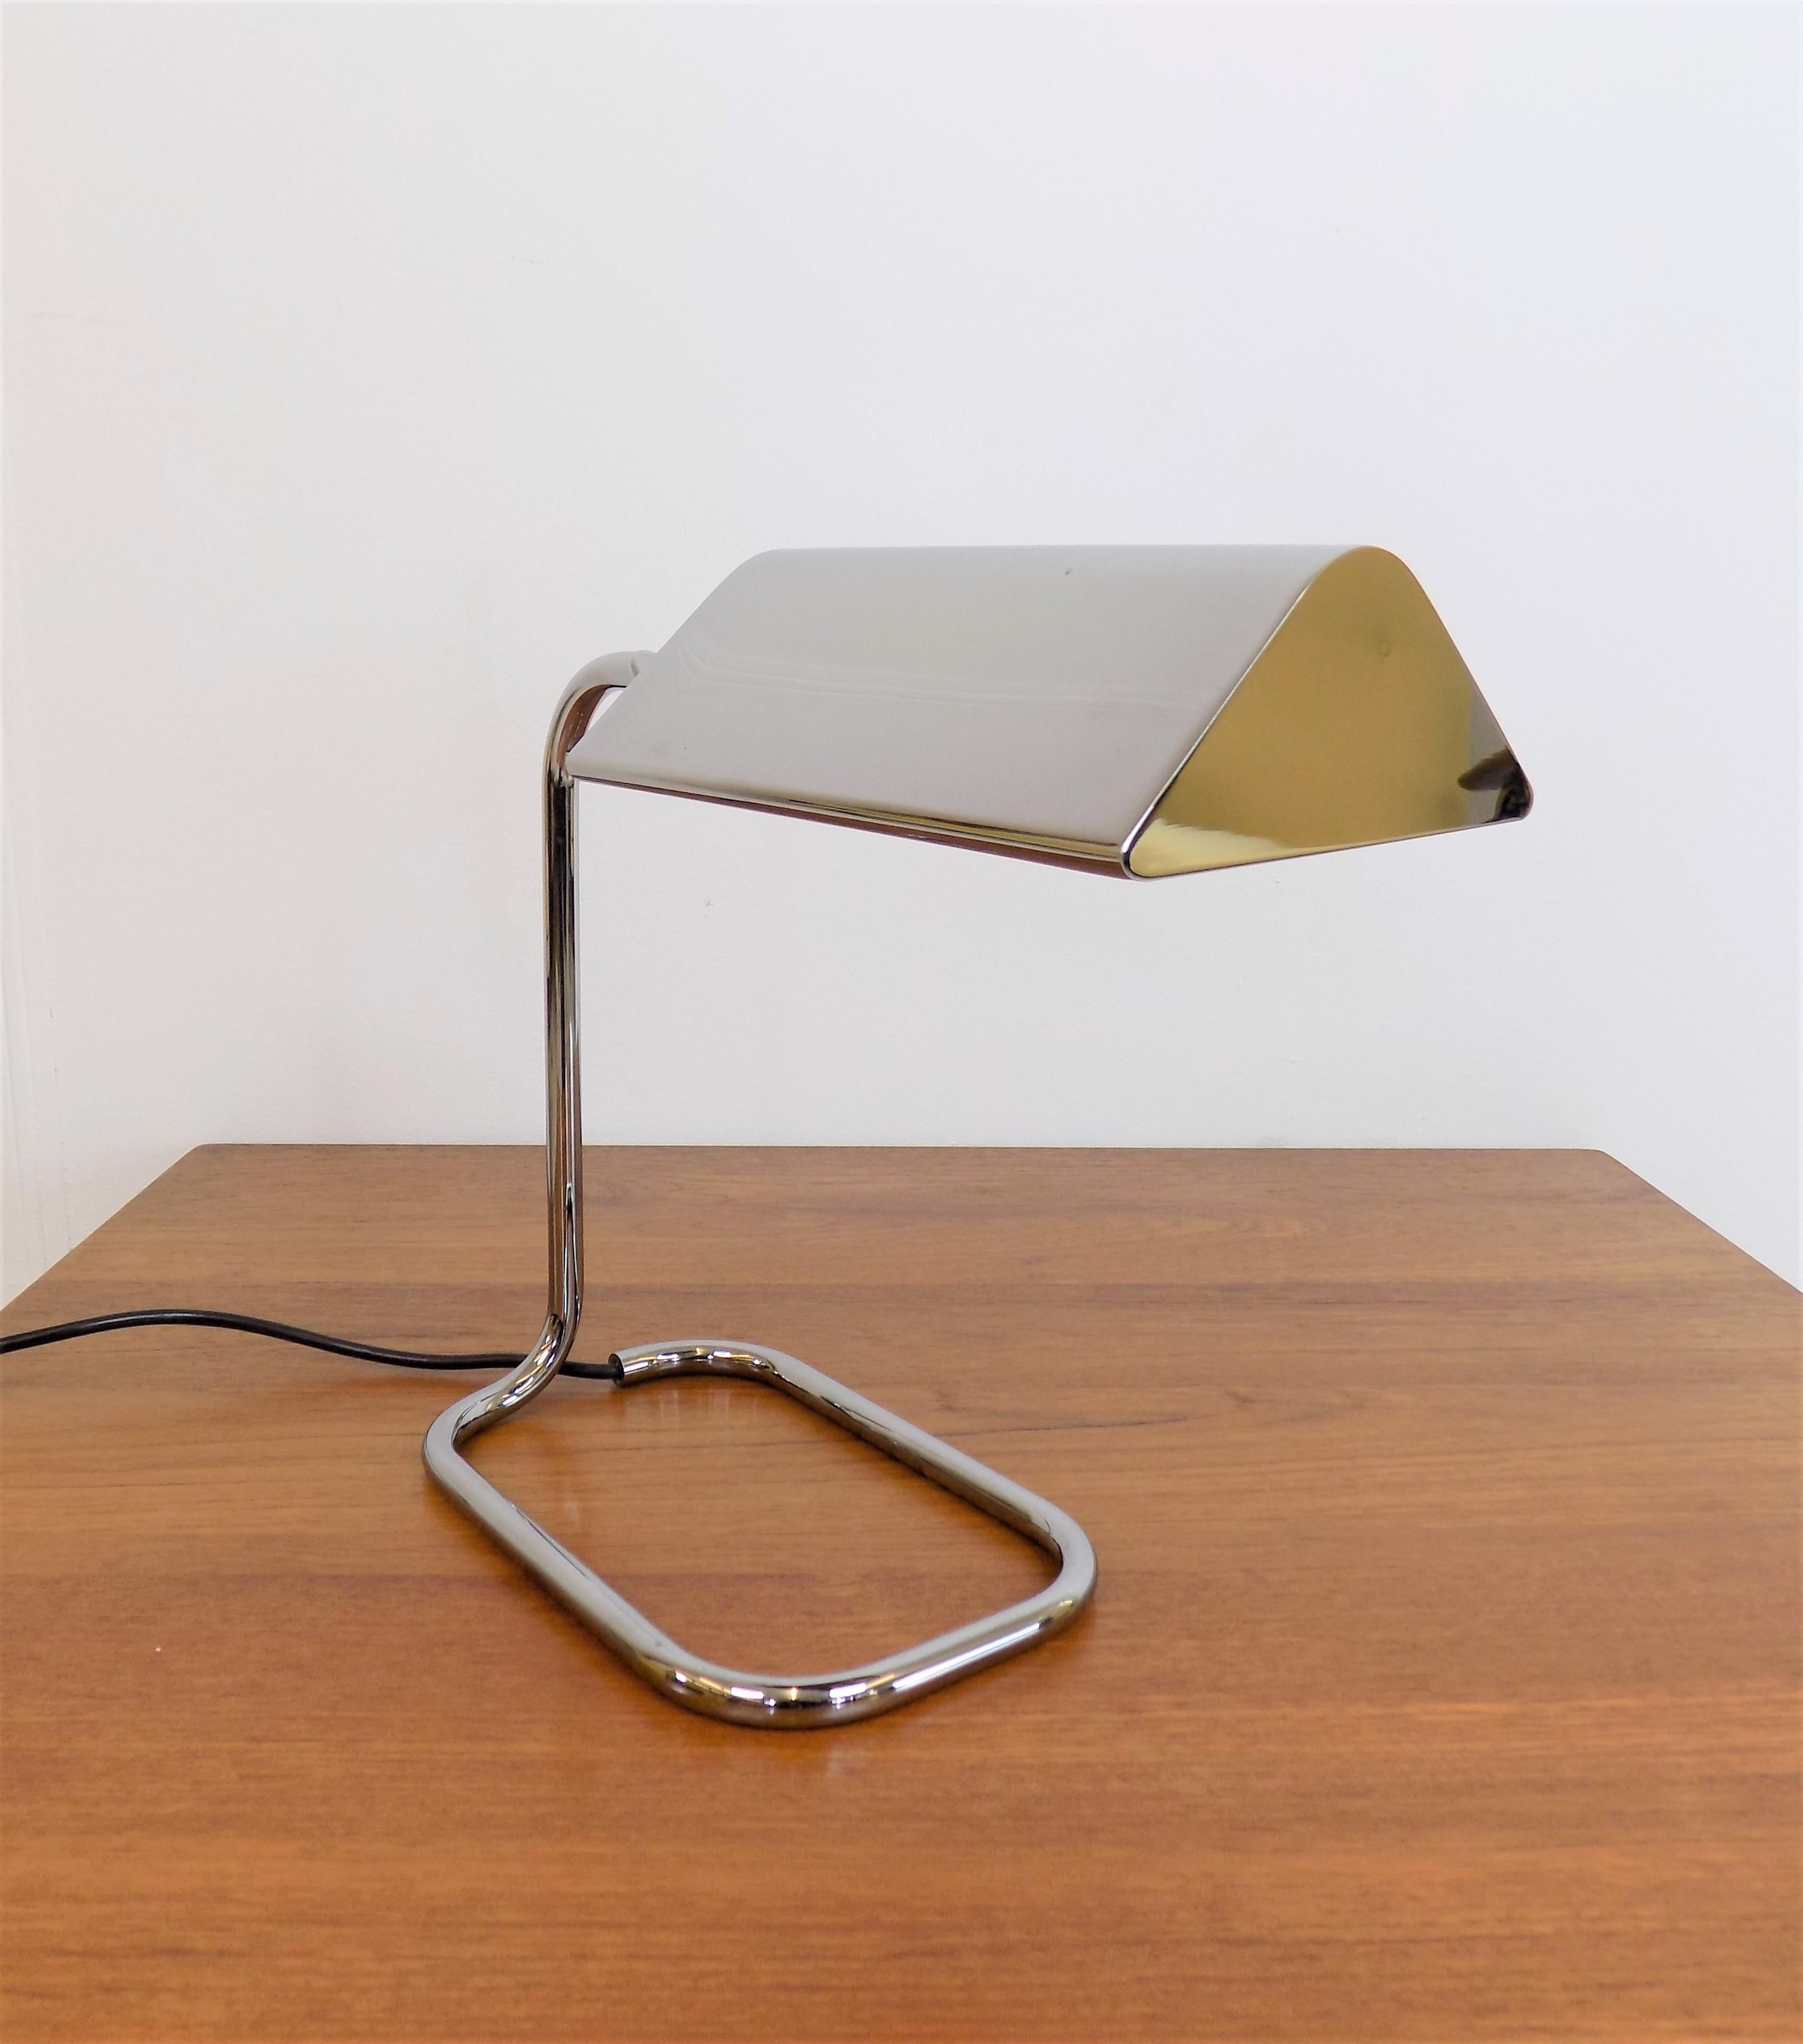 Table lamp from the 1970s by the German lighting manufacturer Florian Schulz. The lamp is in the Hollywood Regency style and was designed and manufactured by Florian Schulz. The lamp is in very good condition and shows no signs of wear. The